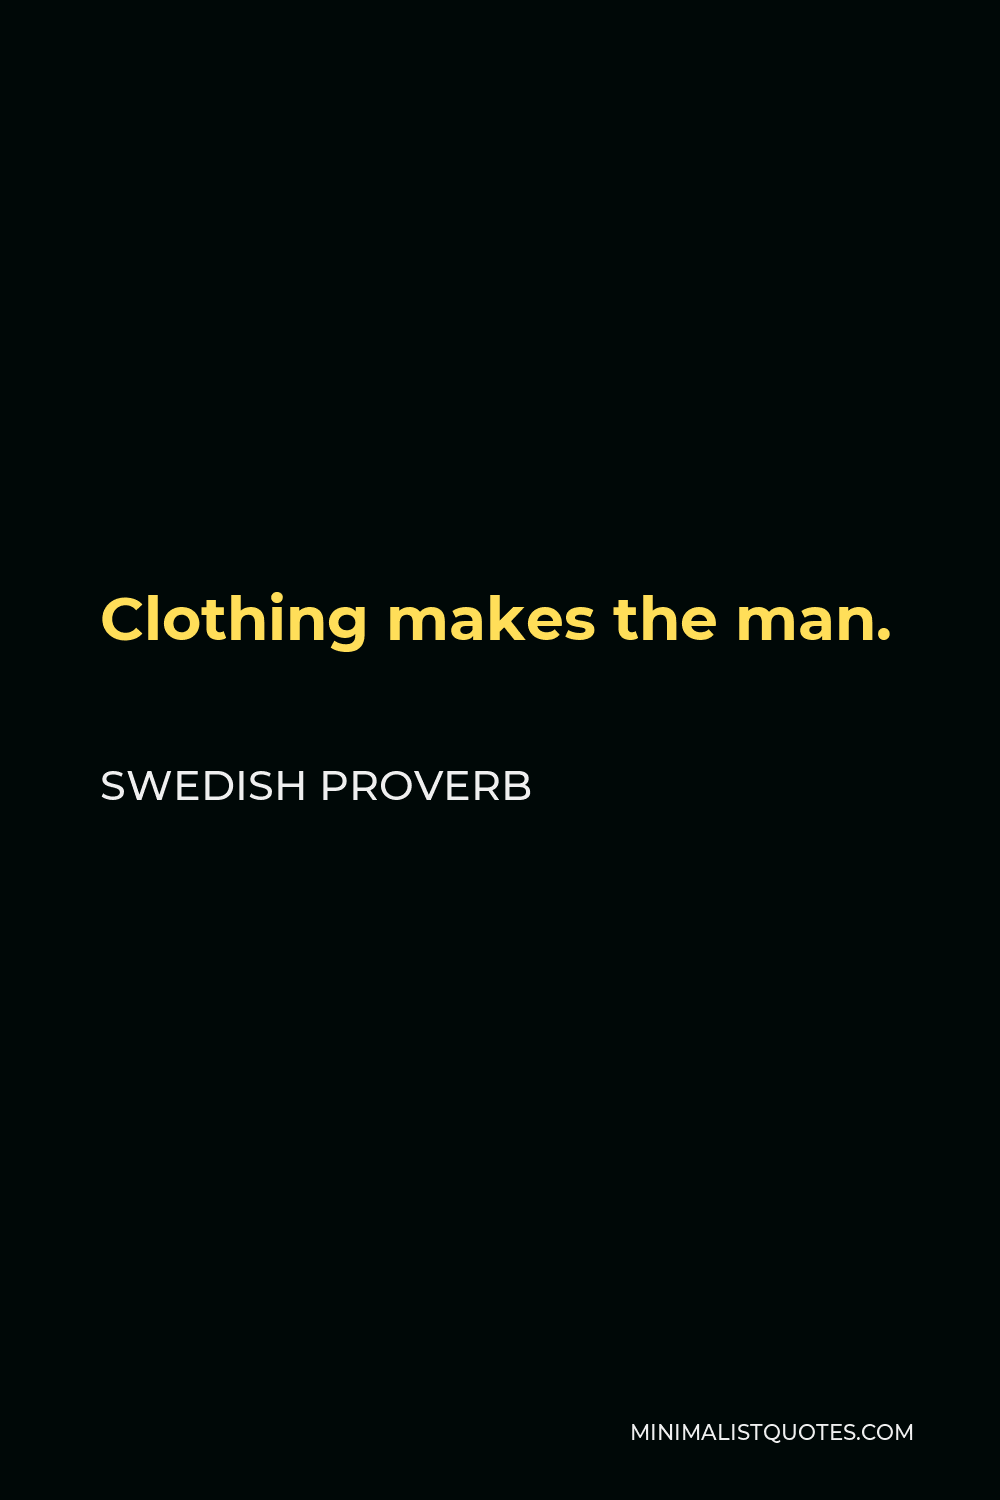 Swedish Proverb Quote - Clothing makes the man.